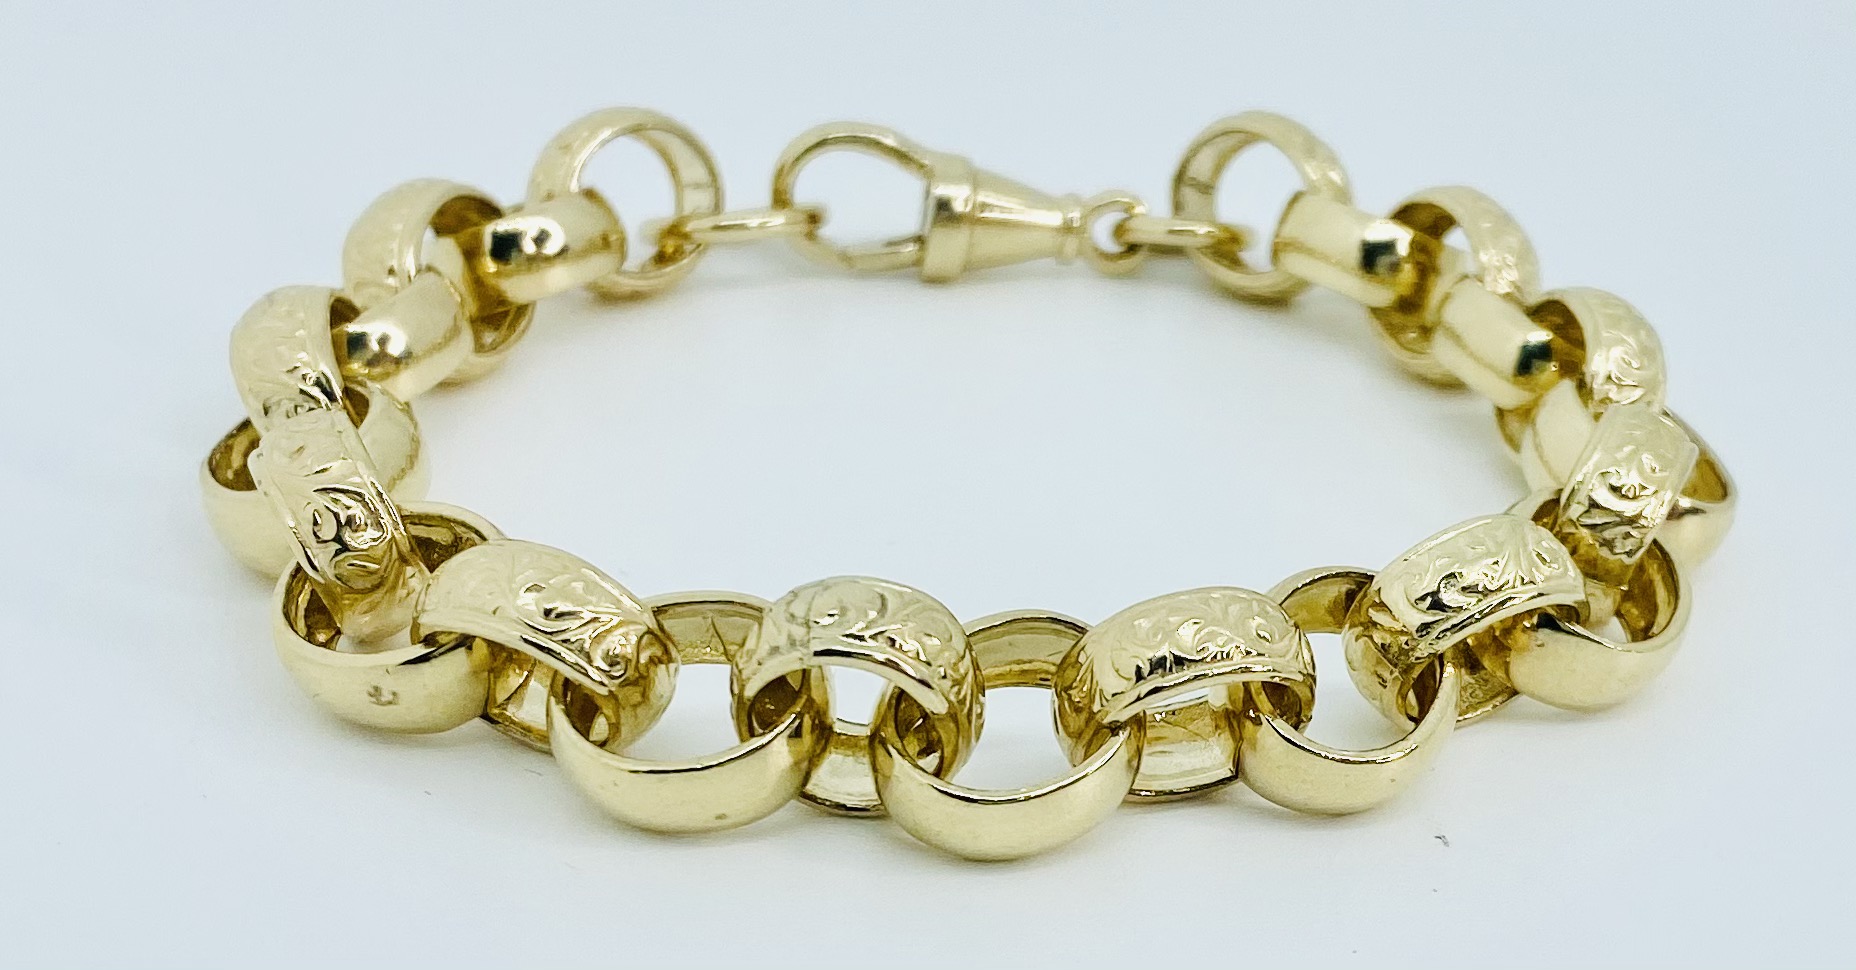 Belcher Bracelet, 9ct gold 9 inch | Smiths the Jewellers Lincoln